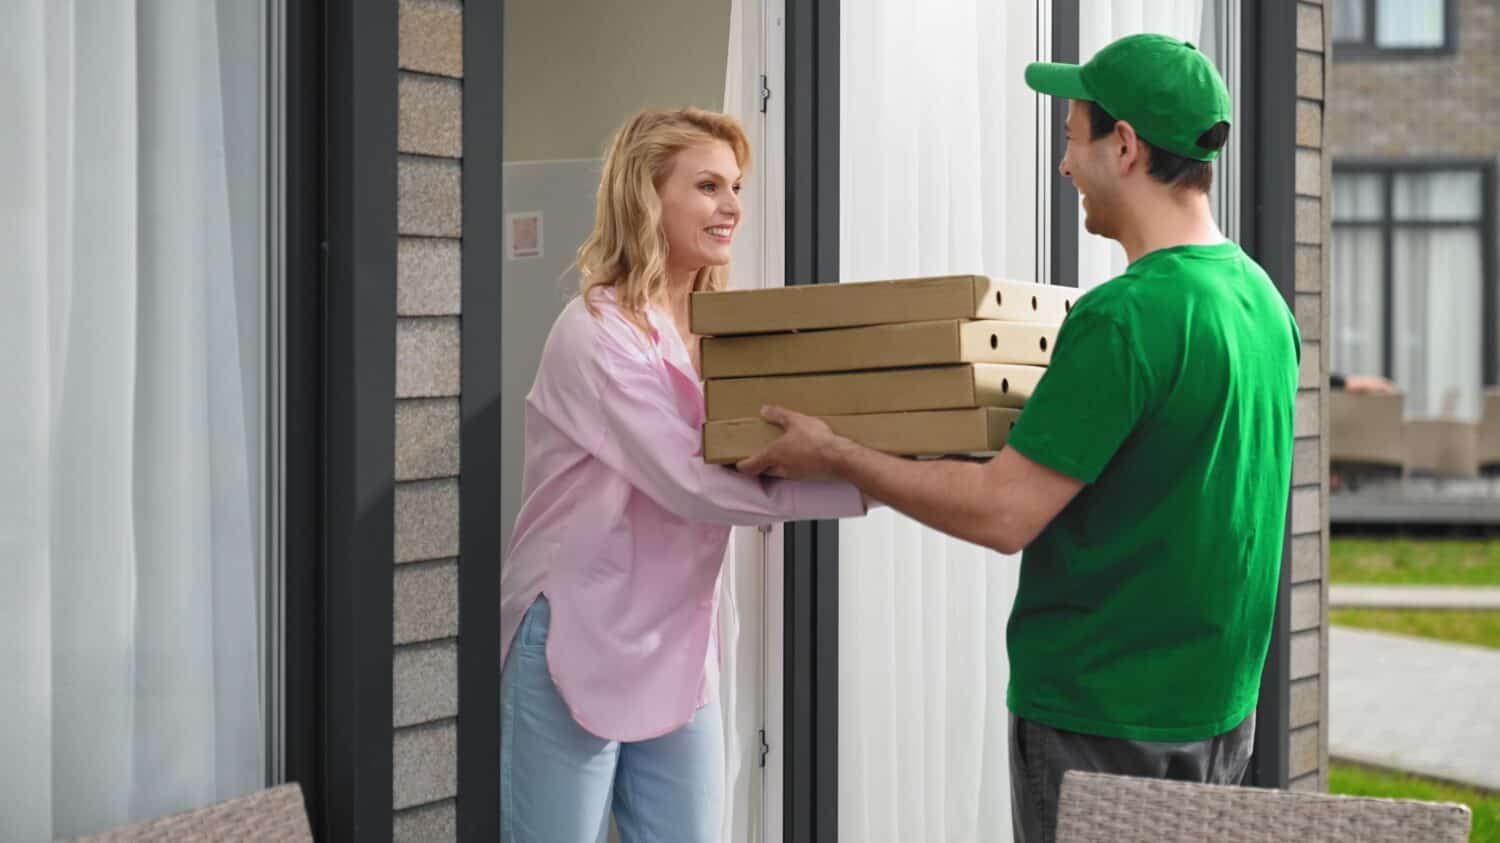 Lot pizza box deliver. Man give many hot pie. Fast food delivery service. Joy girl meet pizzeria courier. Young adult person order take away meal. Tasty pizza home delivery. Online city eat cafe job.